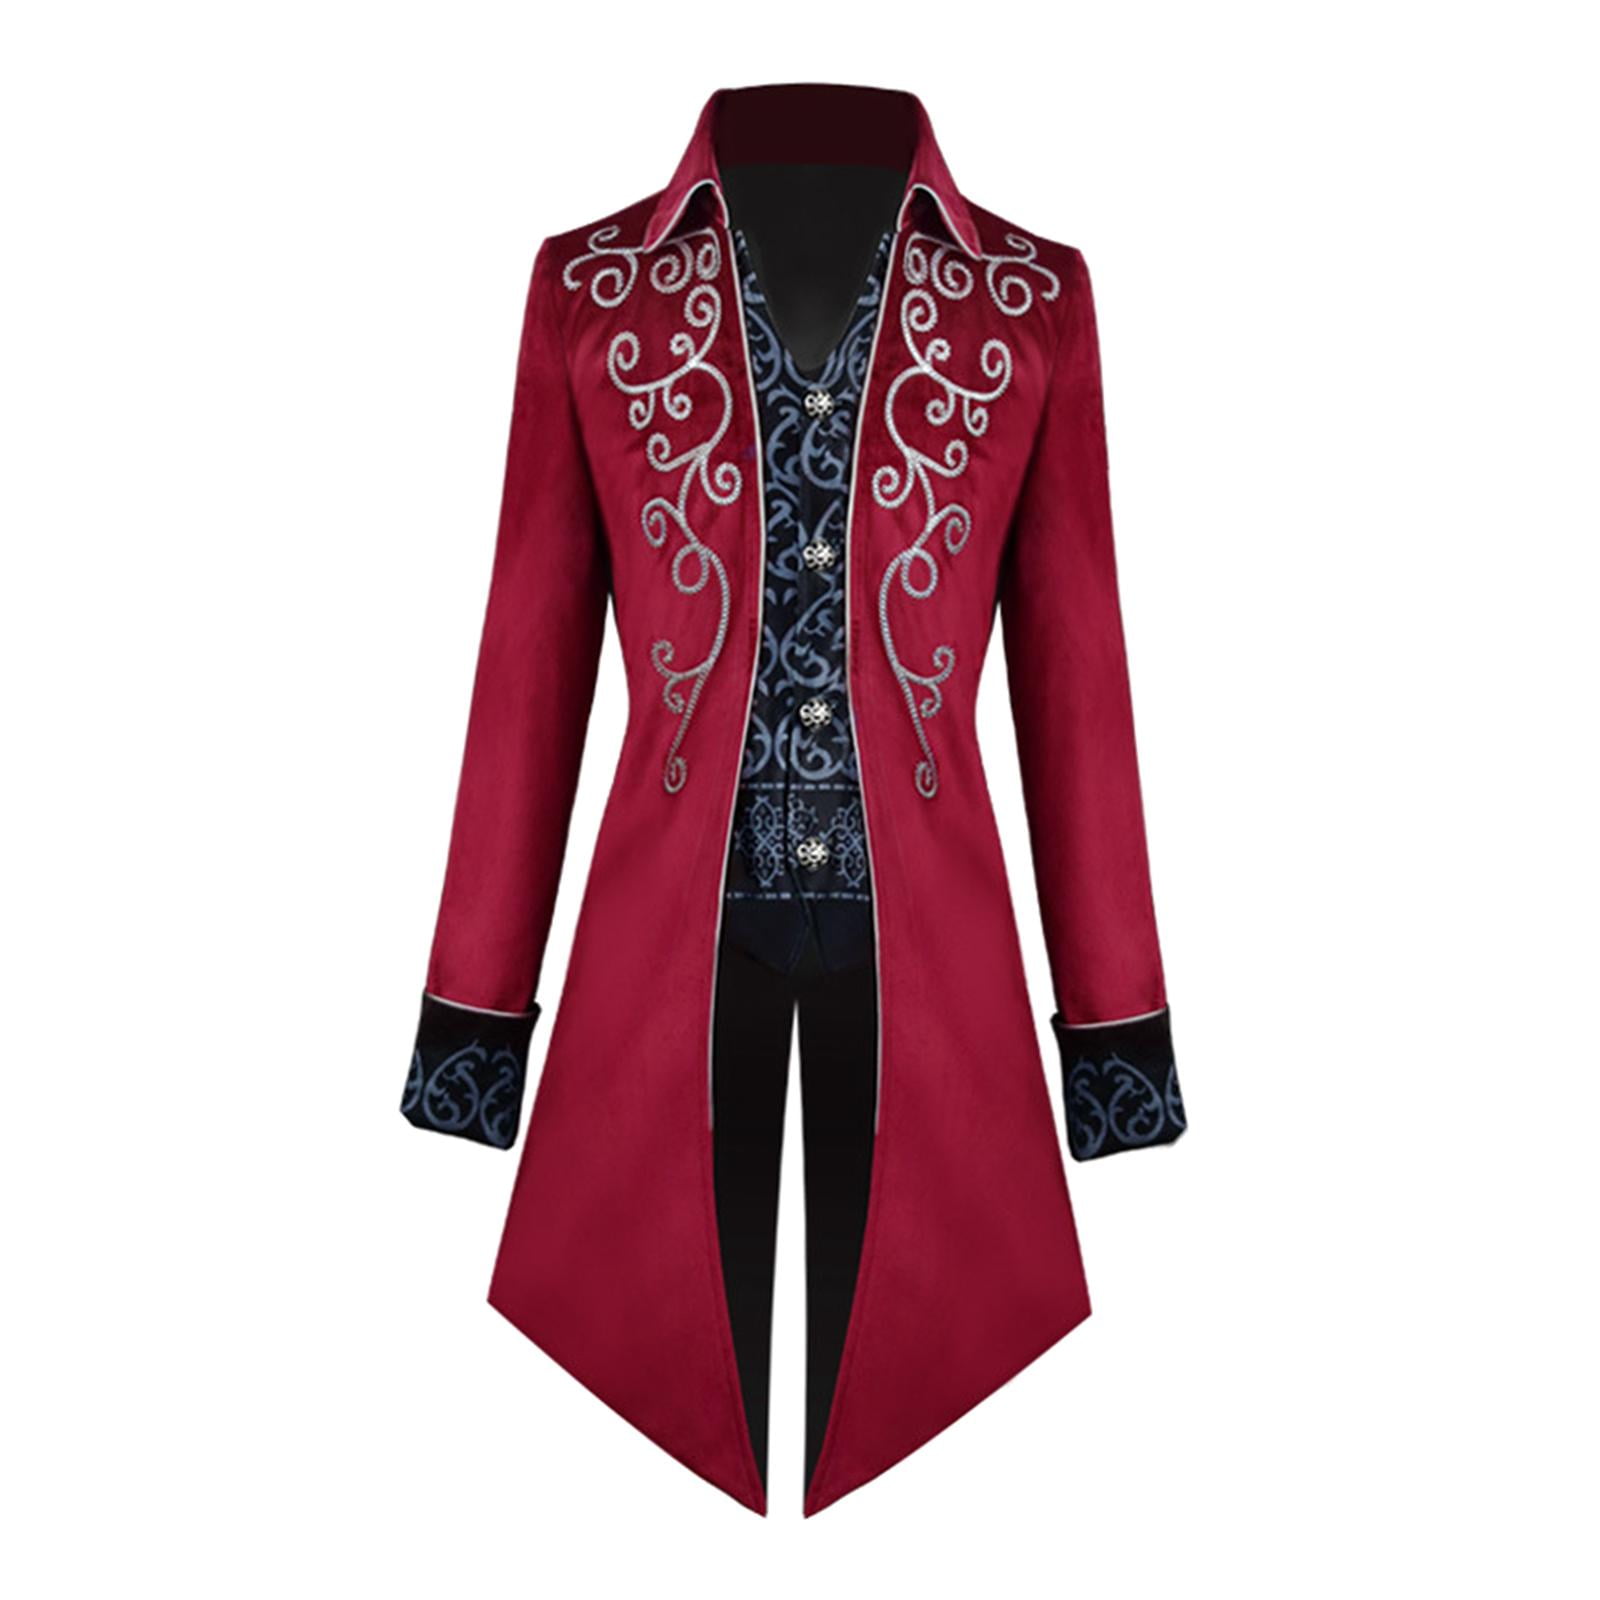 Men's Gothic Jacket Tailcoat Cosplay Costume Medieval Party Steampunk Long Coat